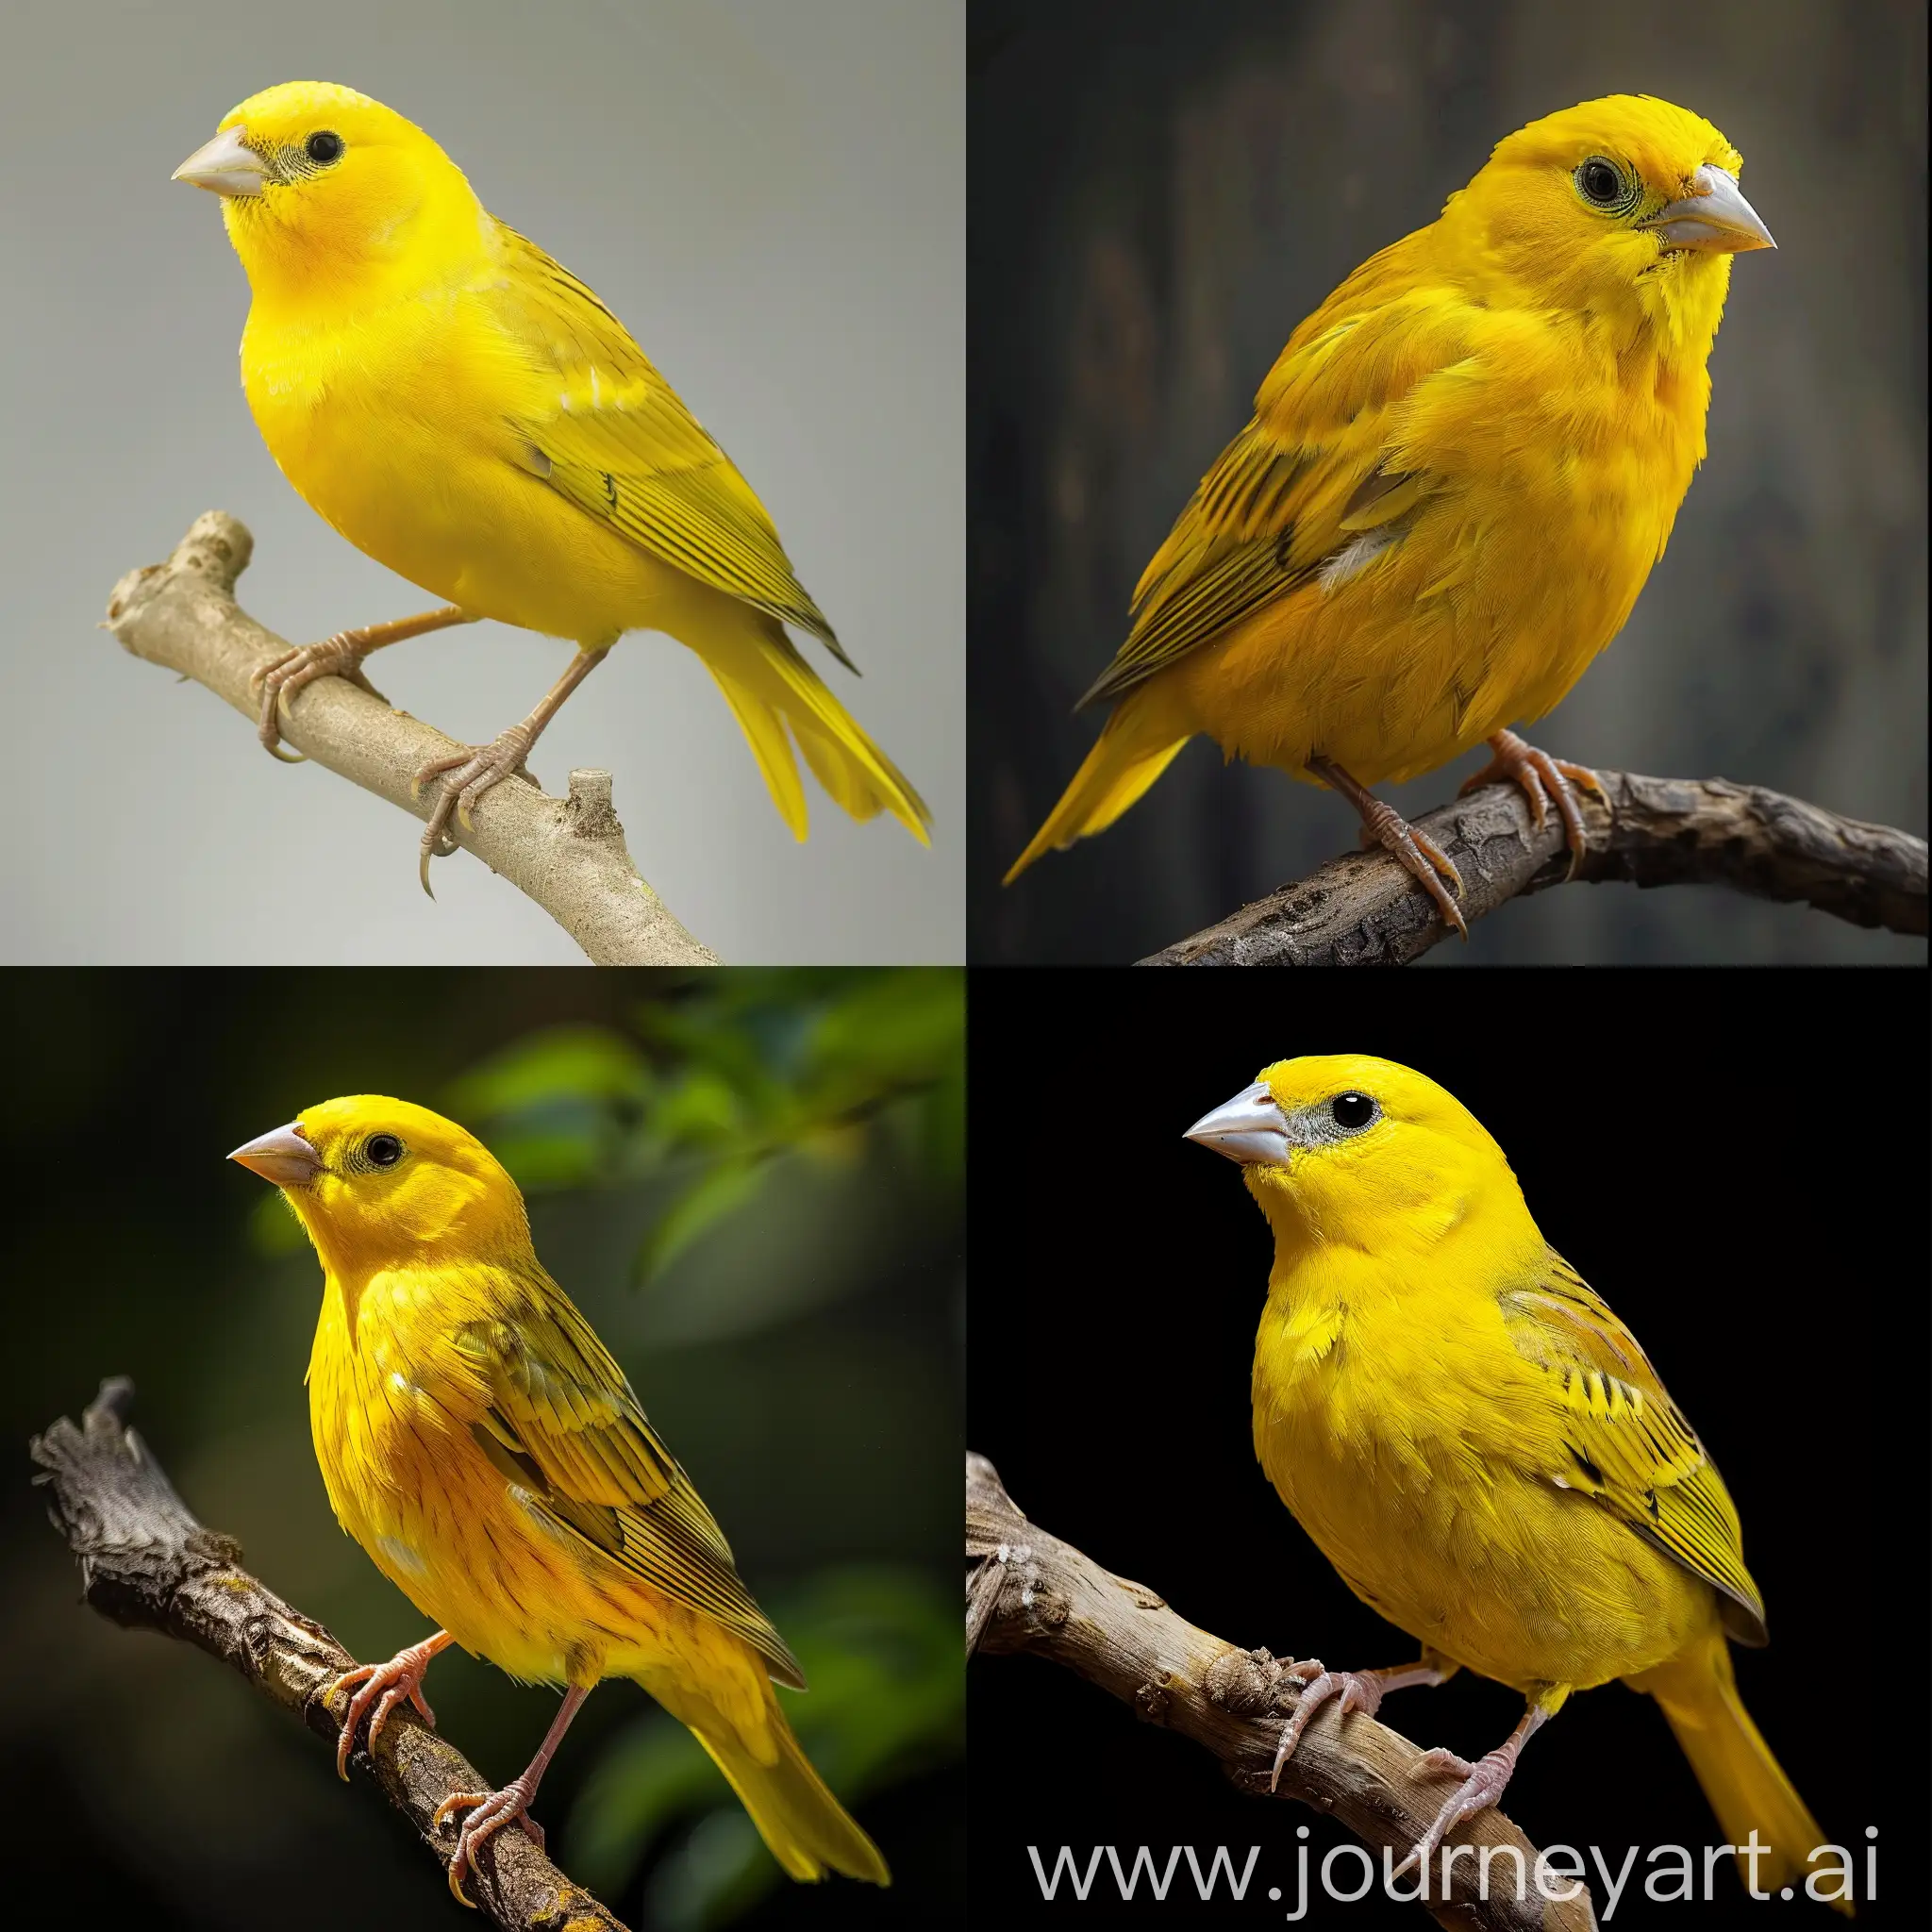 Vibrant-Yellow-Canary-Bird-in-Motion